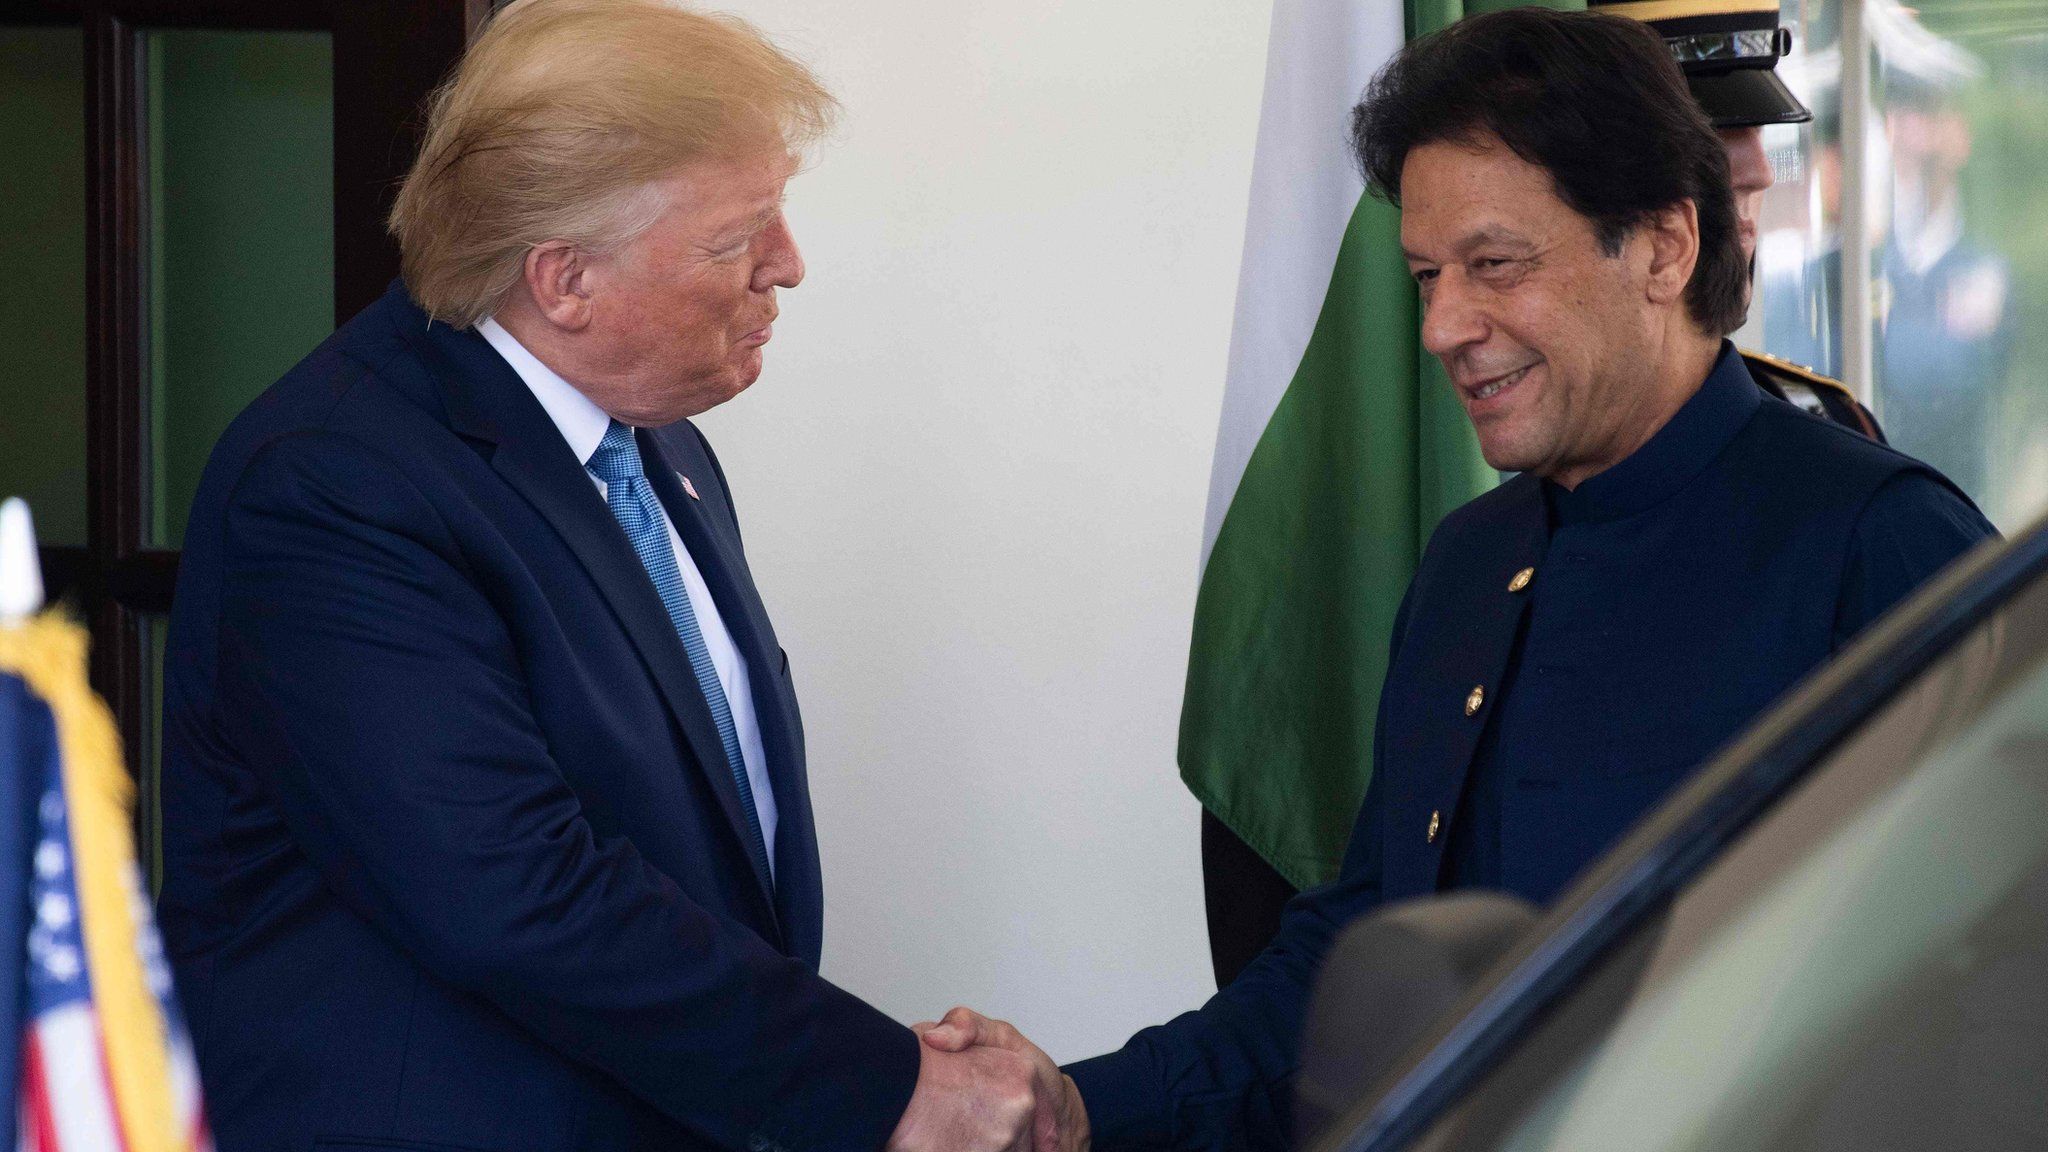 Donald Trump and Imran Khan shake hands at the White House